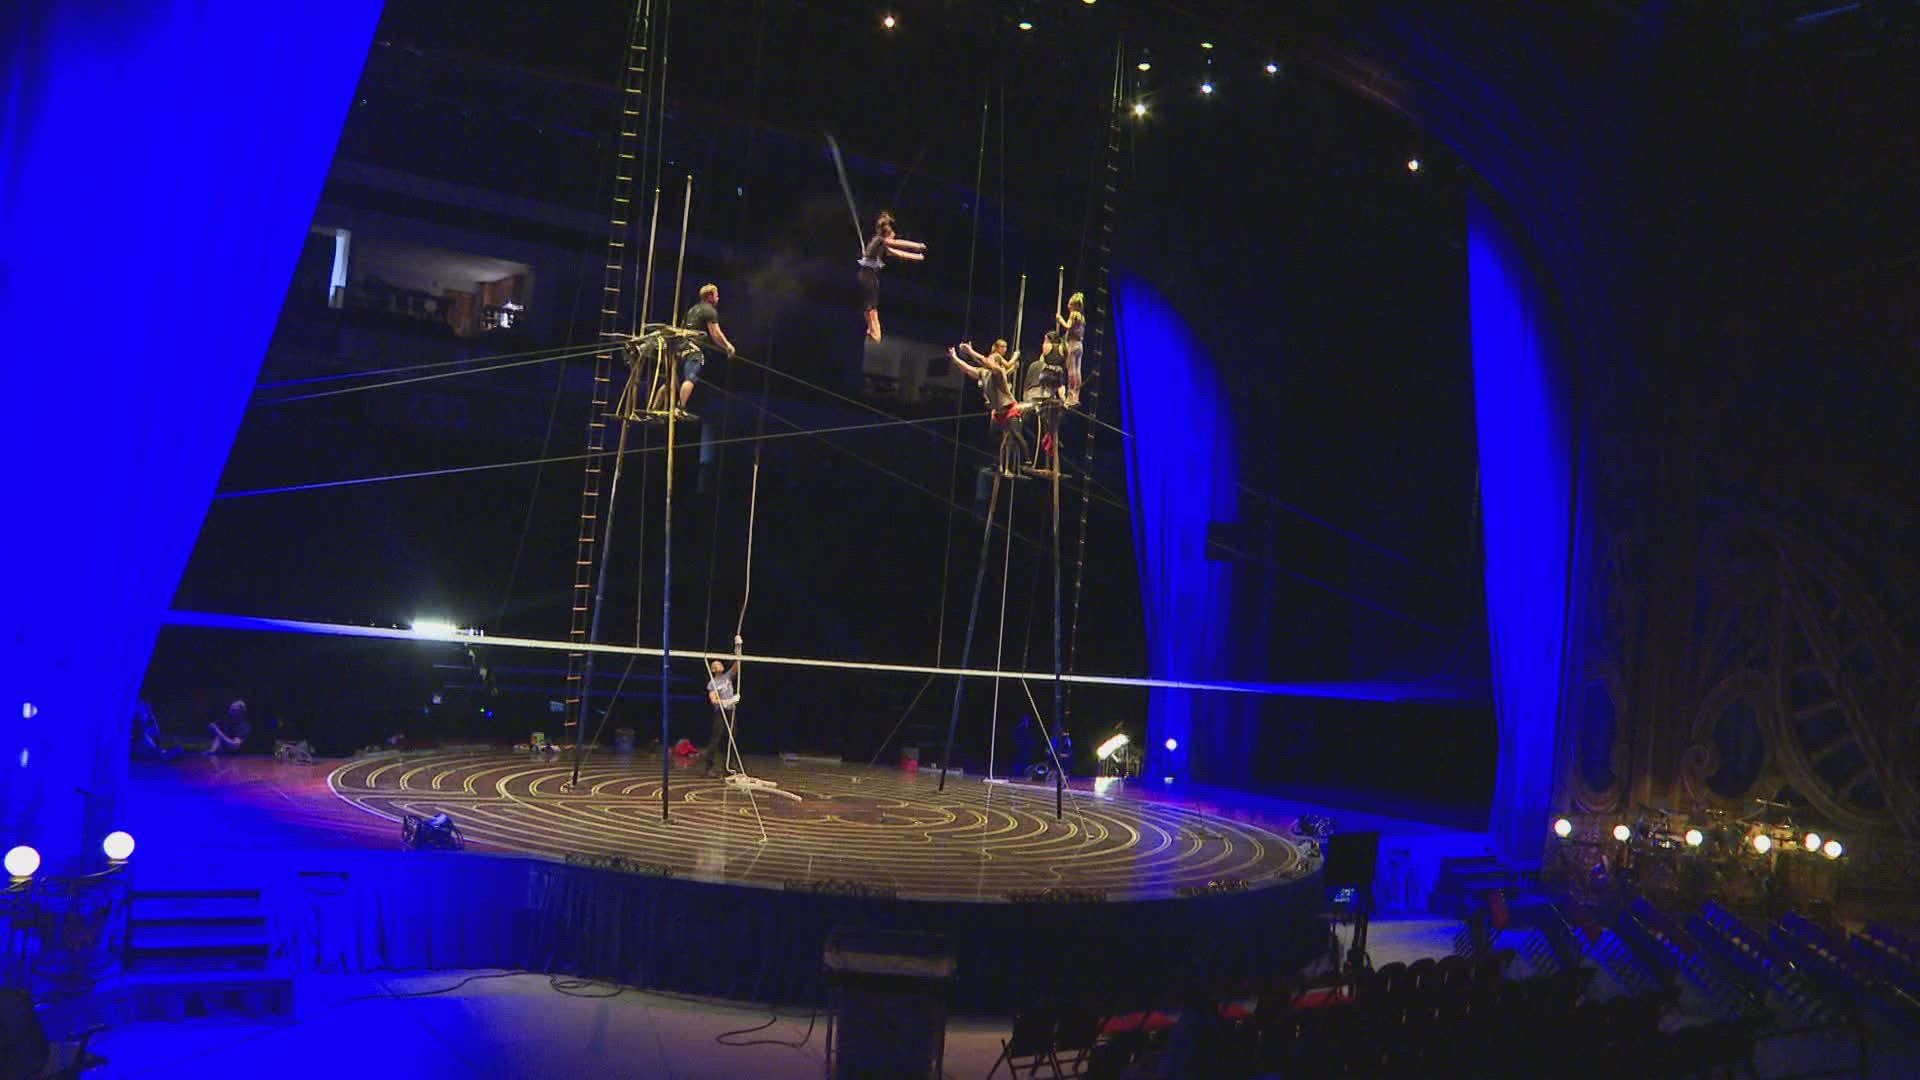 The circus show will be in town starting Friday night until Sunday. Standard ticket pricing starts at $59.